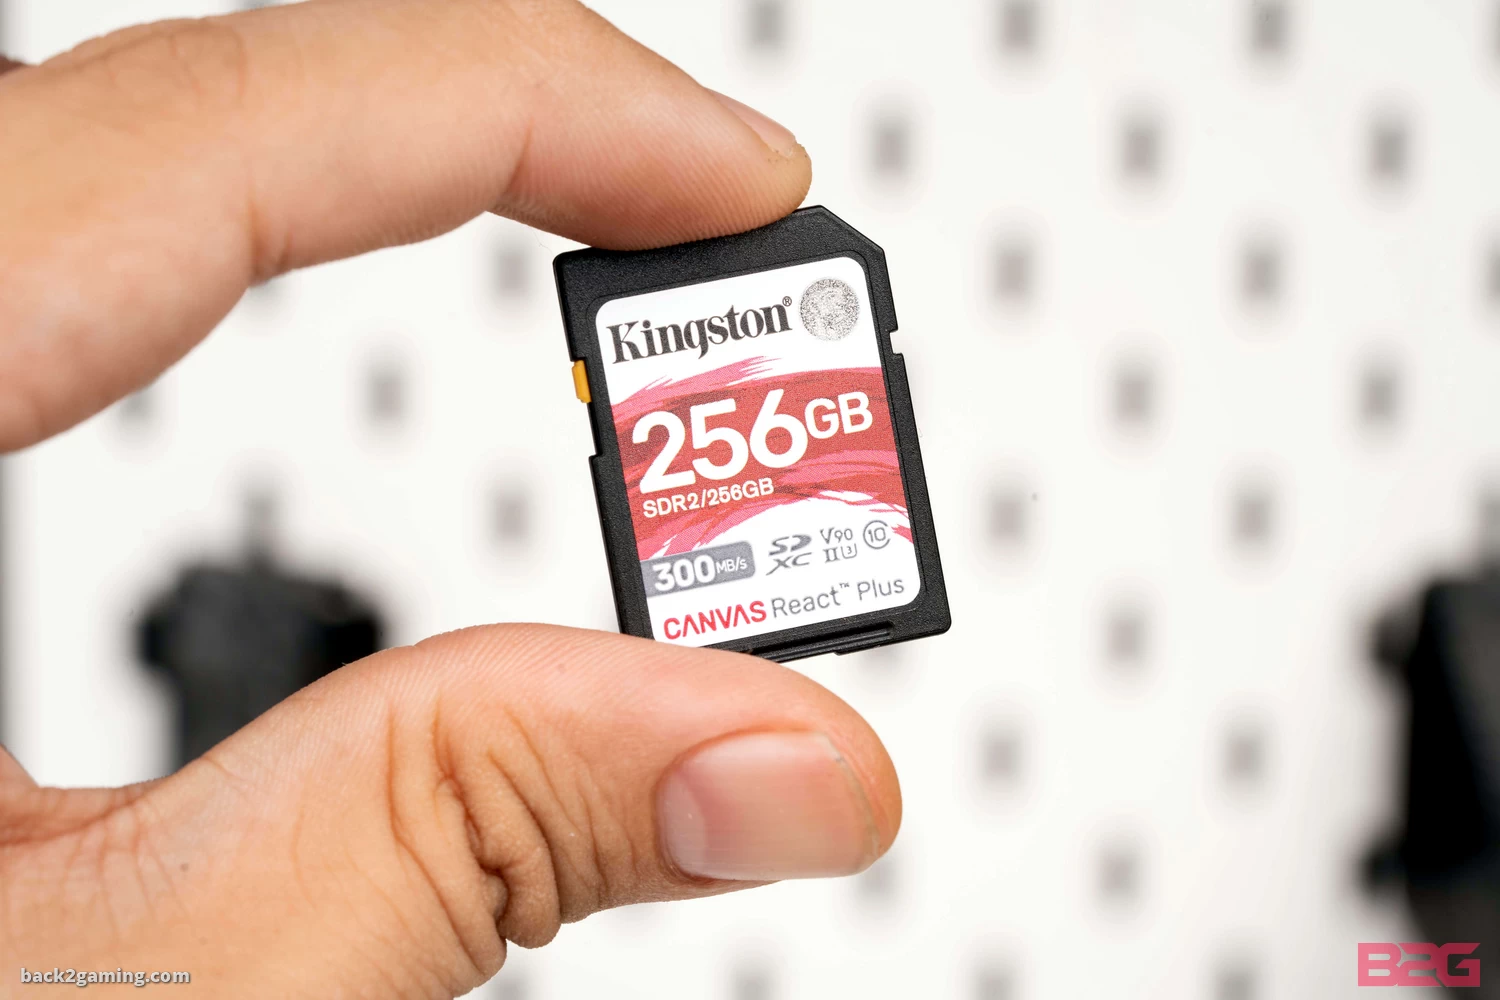 Kingston CANVAS React Plus 256GB UHS-II SD Card Review -